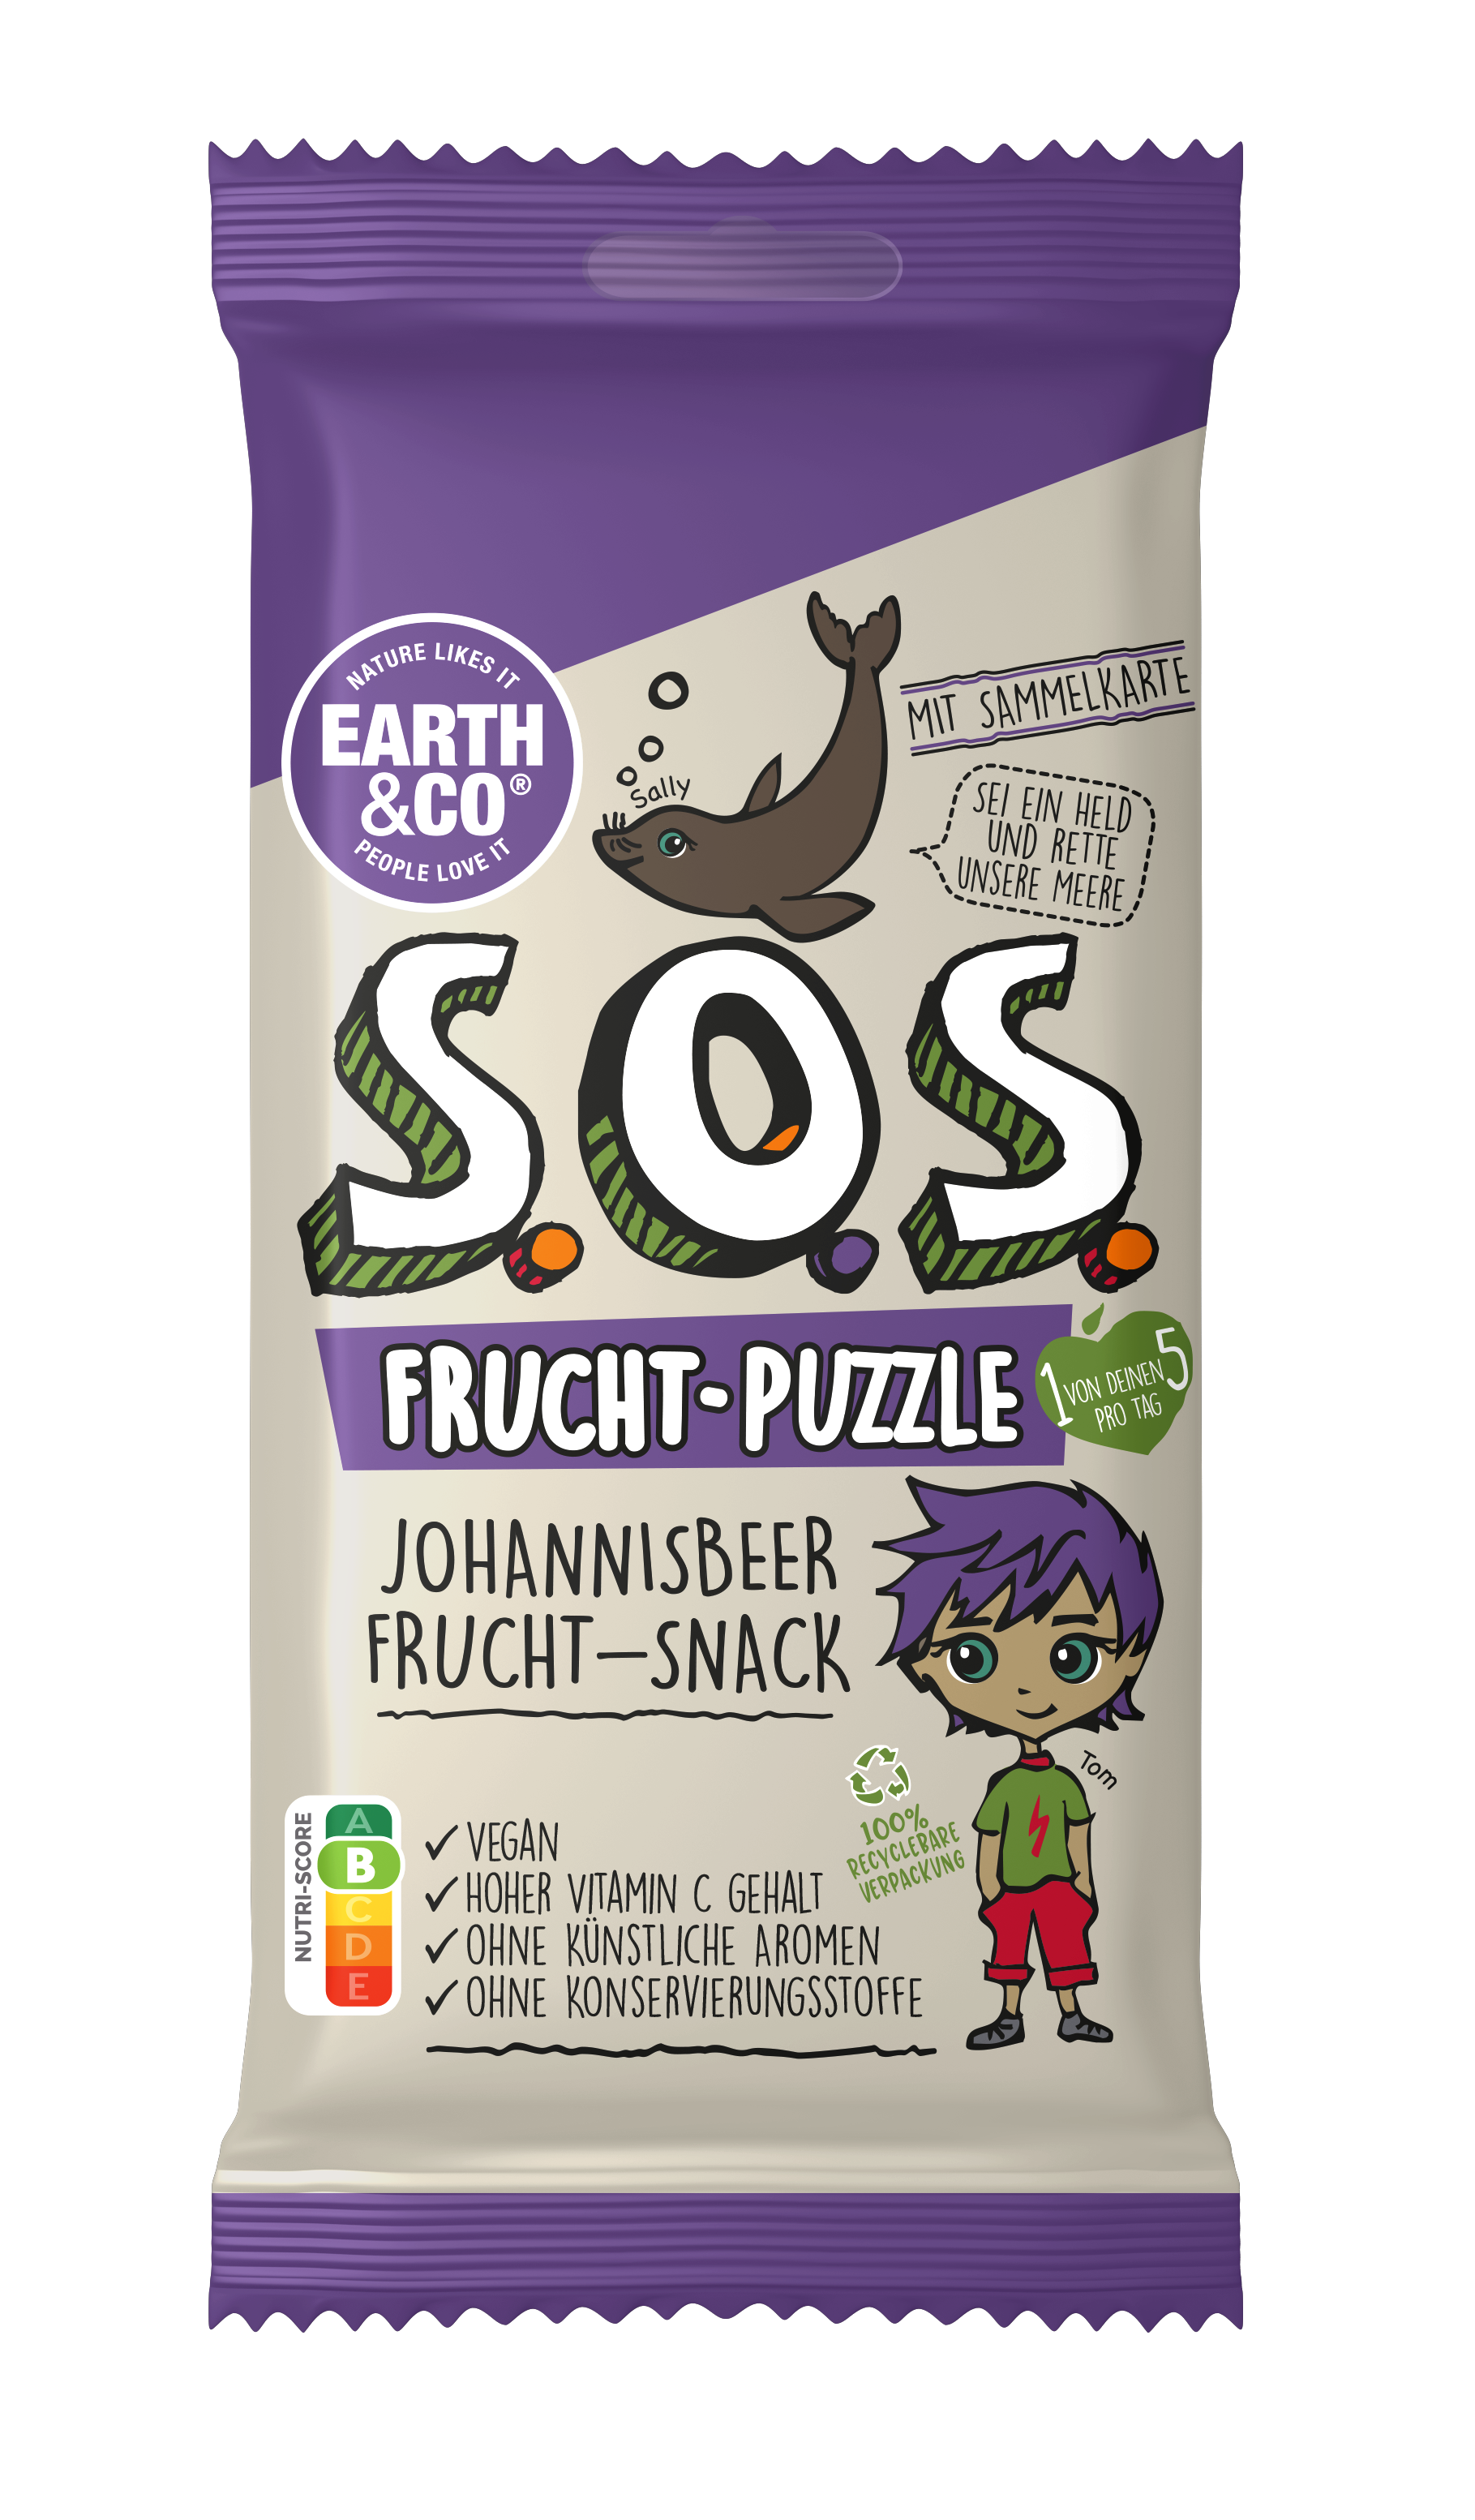 S.O.S. Frucht-Puzzle Johannisbeer